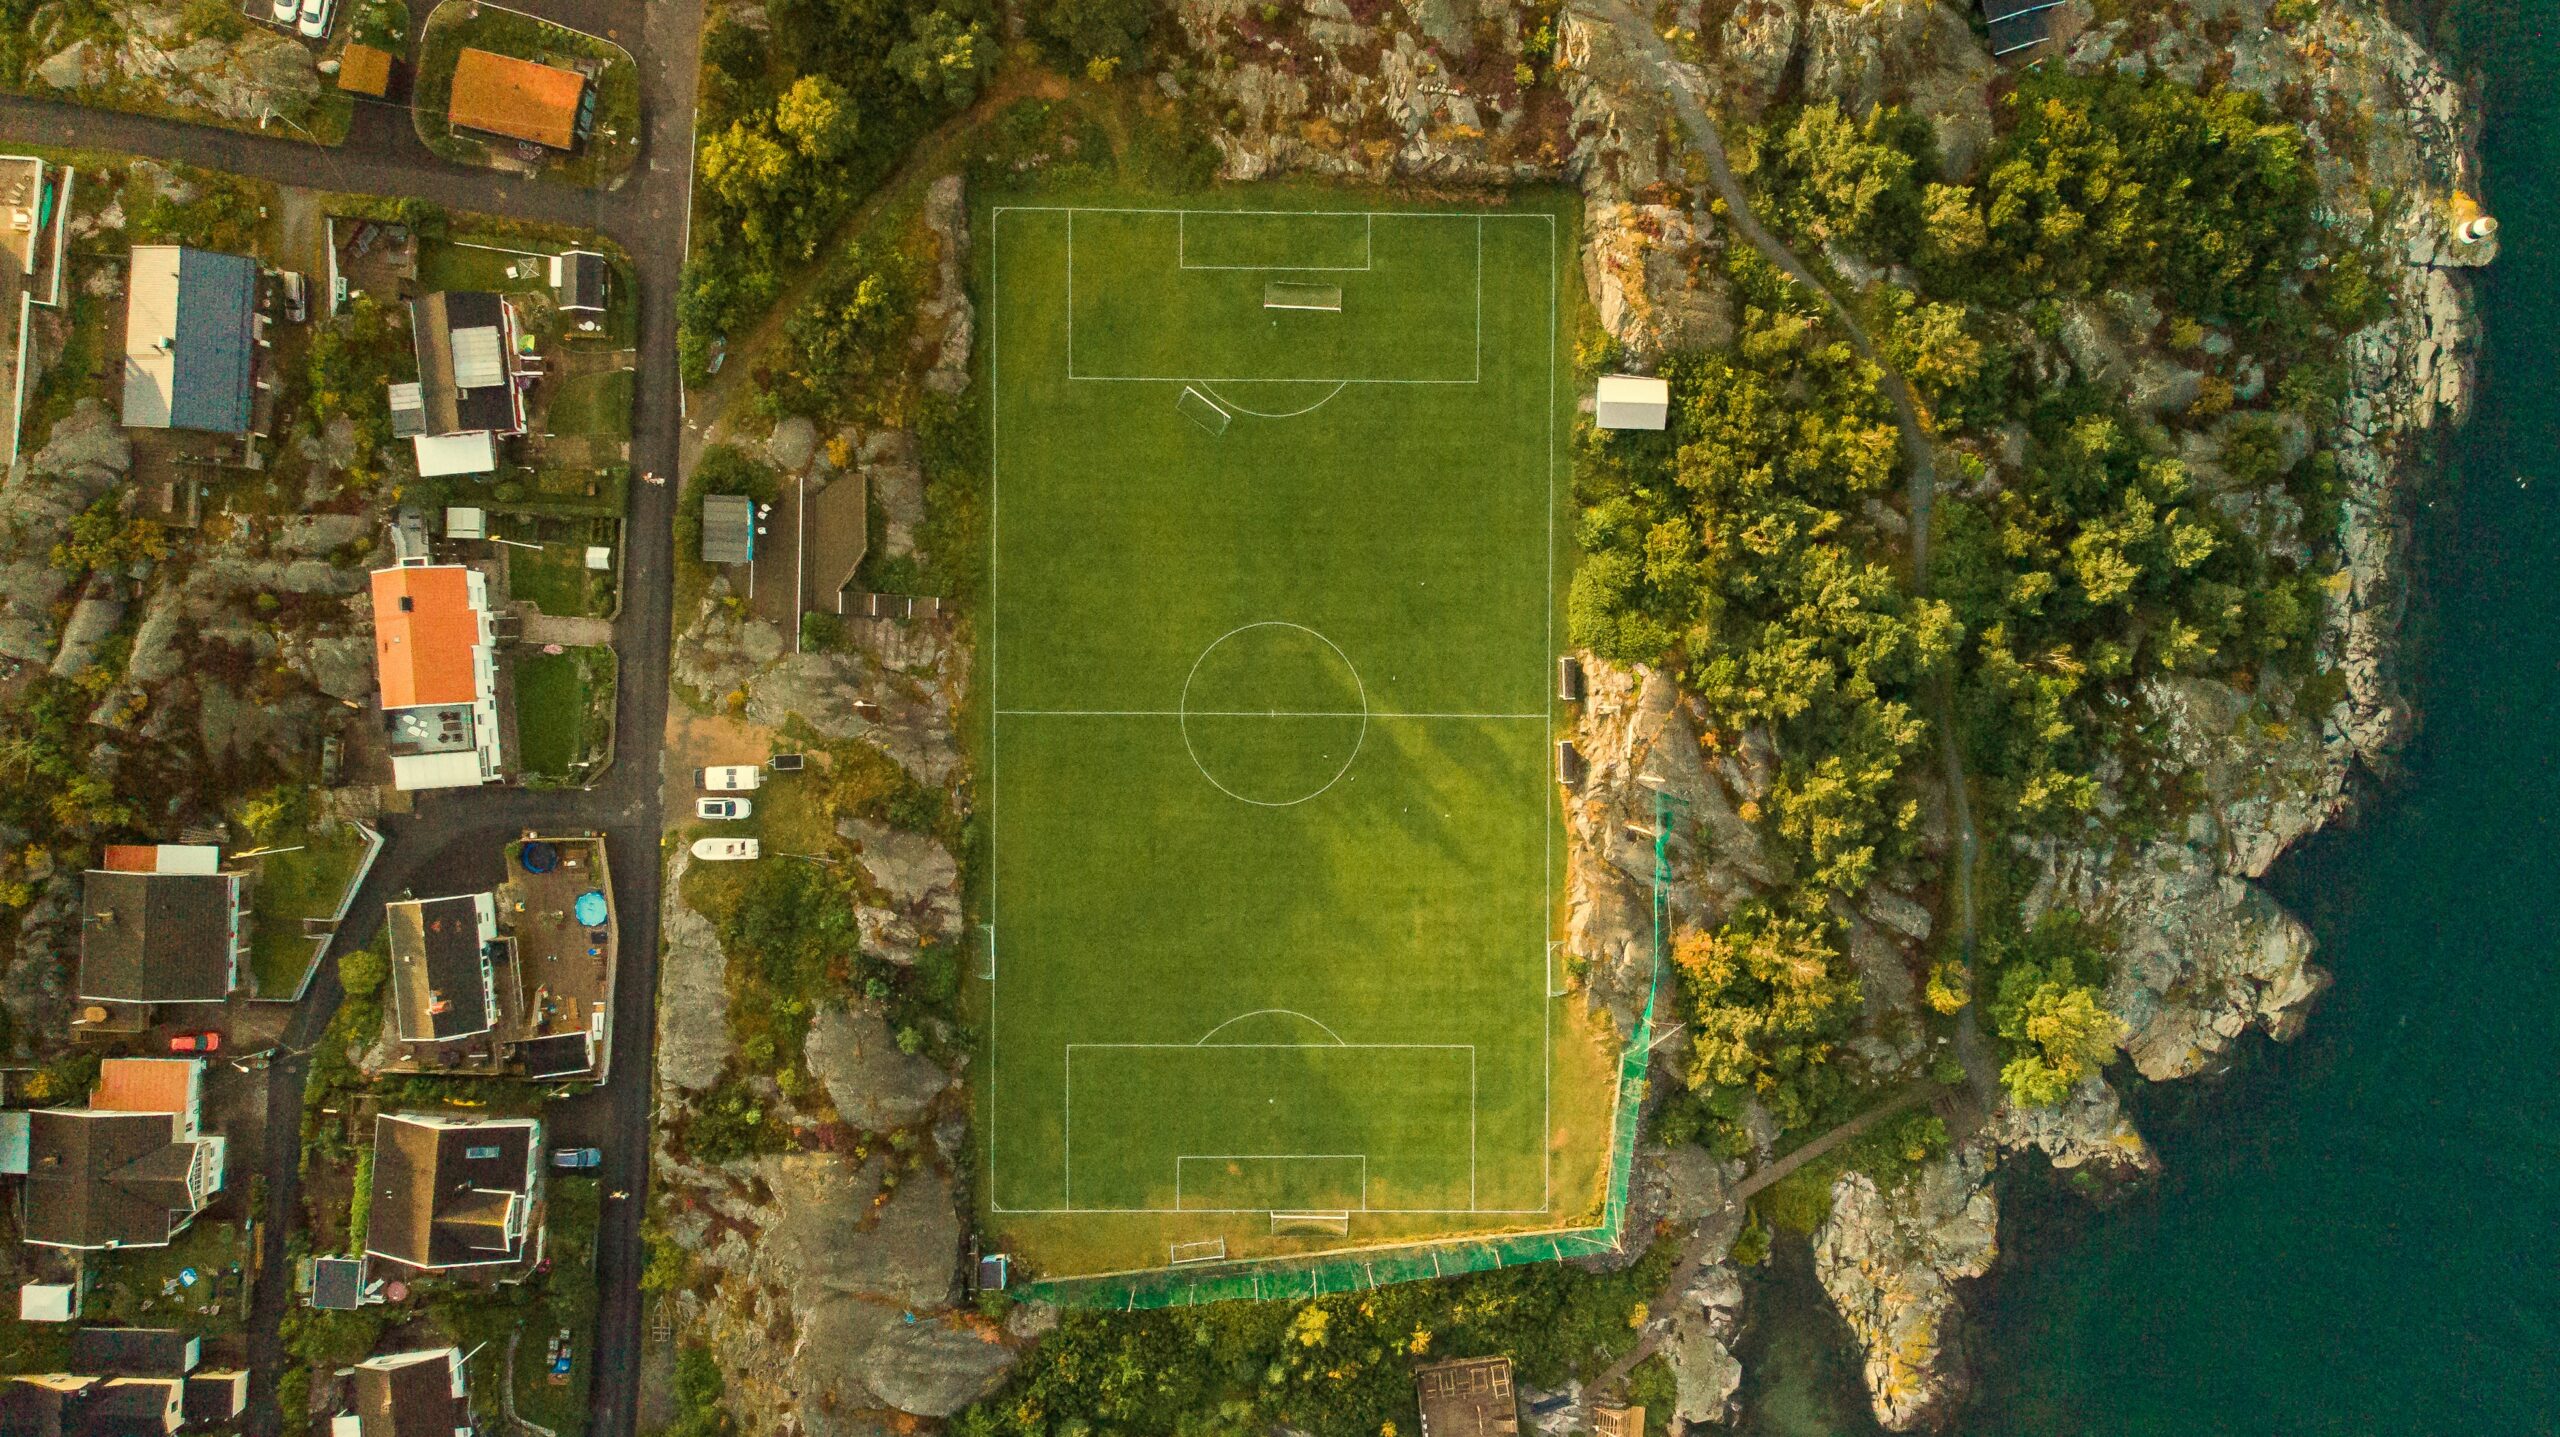 aerial image of a soccer field